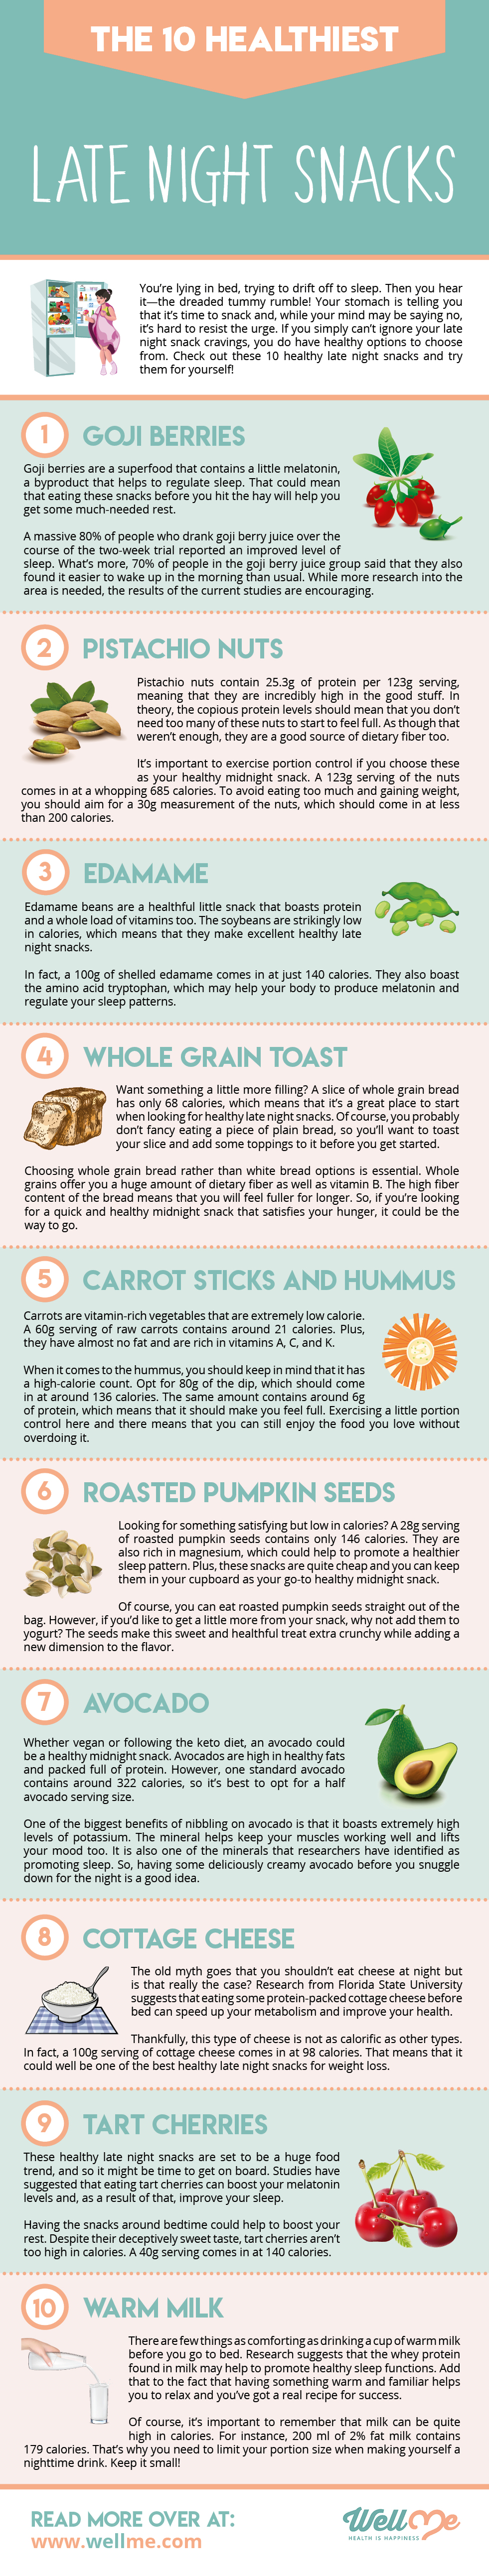 The 10 Healthiest Late Night Snacks Infographic